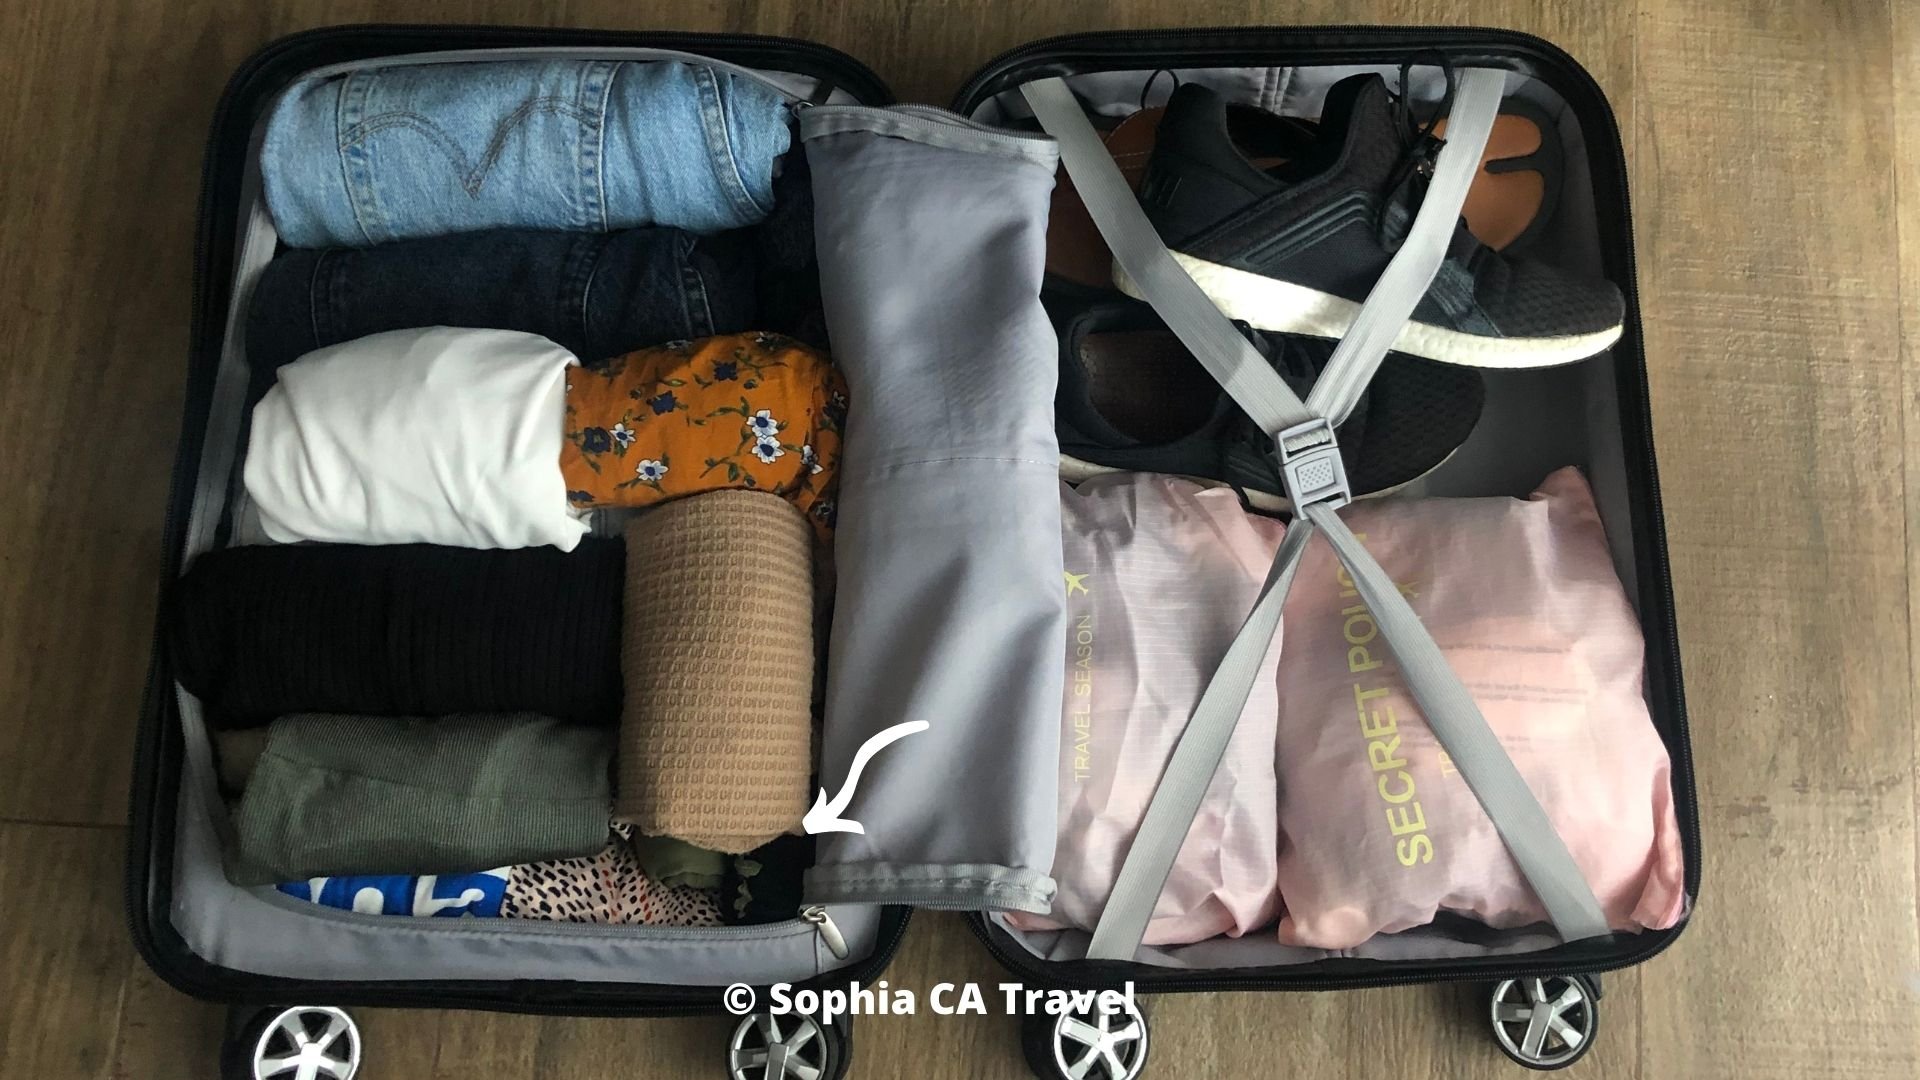 How to Pack a Suitcase Using Army Backpack Packing Tips - Thrillist